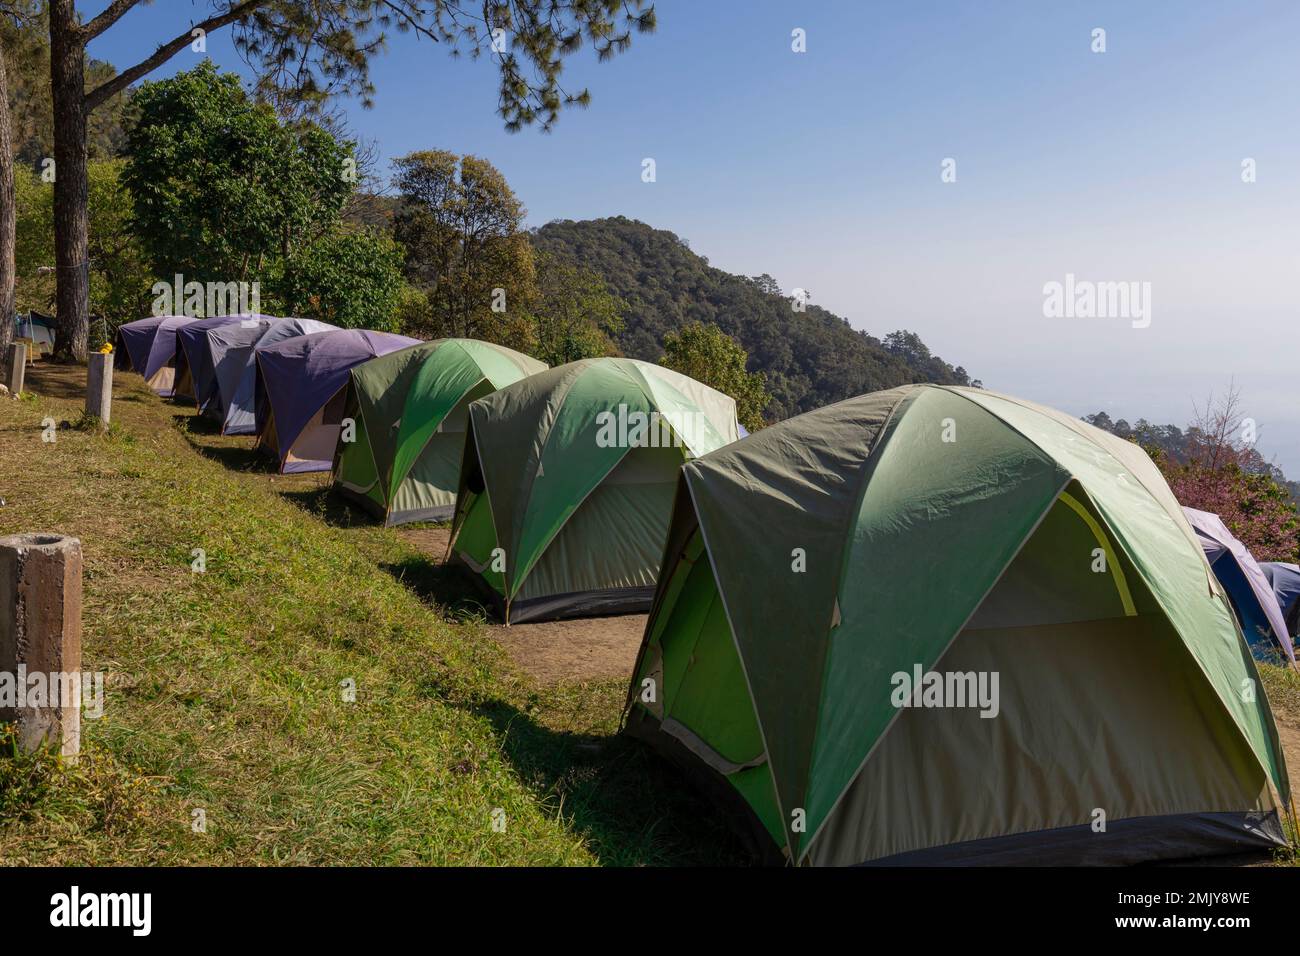 Tents Camping area, On the mountain, Panoramic landscape. Natural area with big trees Stock Photo